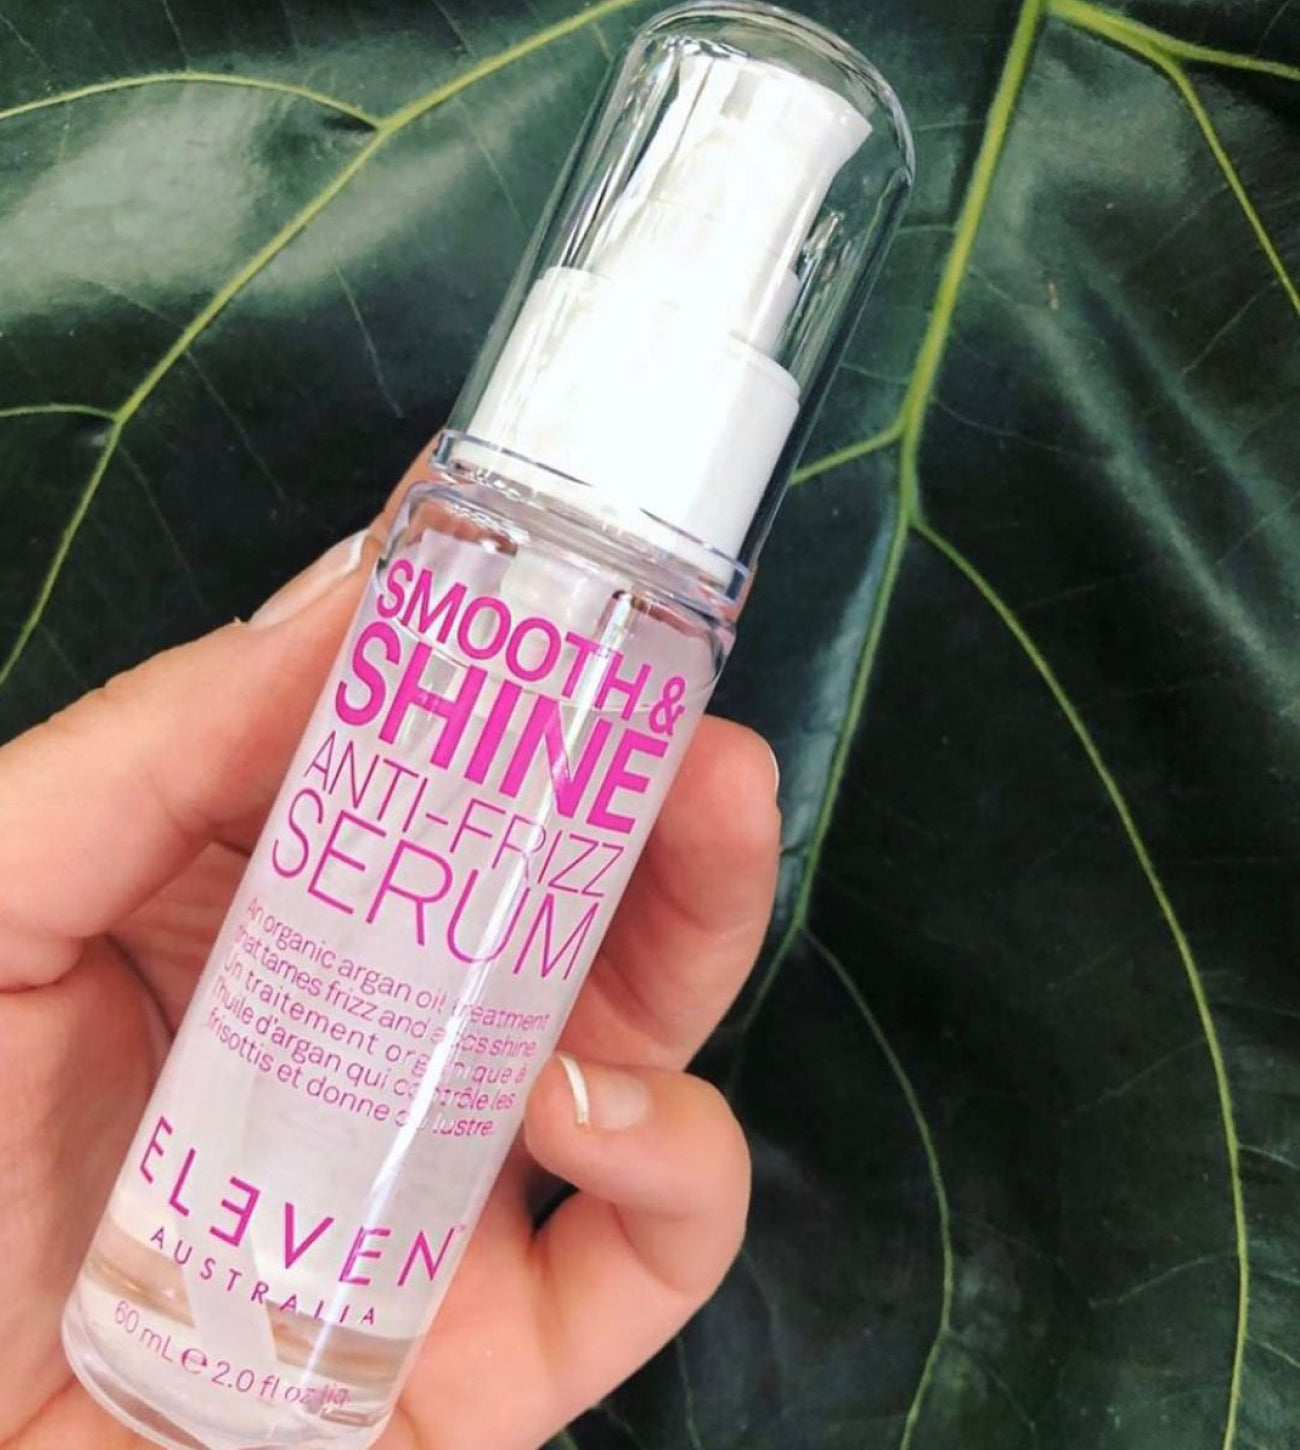 ELEVEN Hair SMOOTH & SHINE ANTI-FRIZZ SERUM worried about frizz? This is the anti-frizz hair product for you